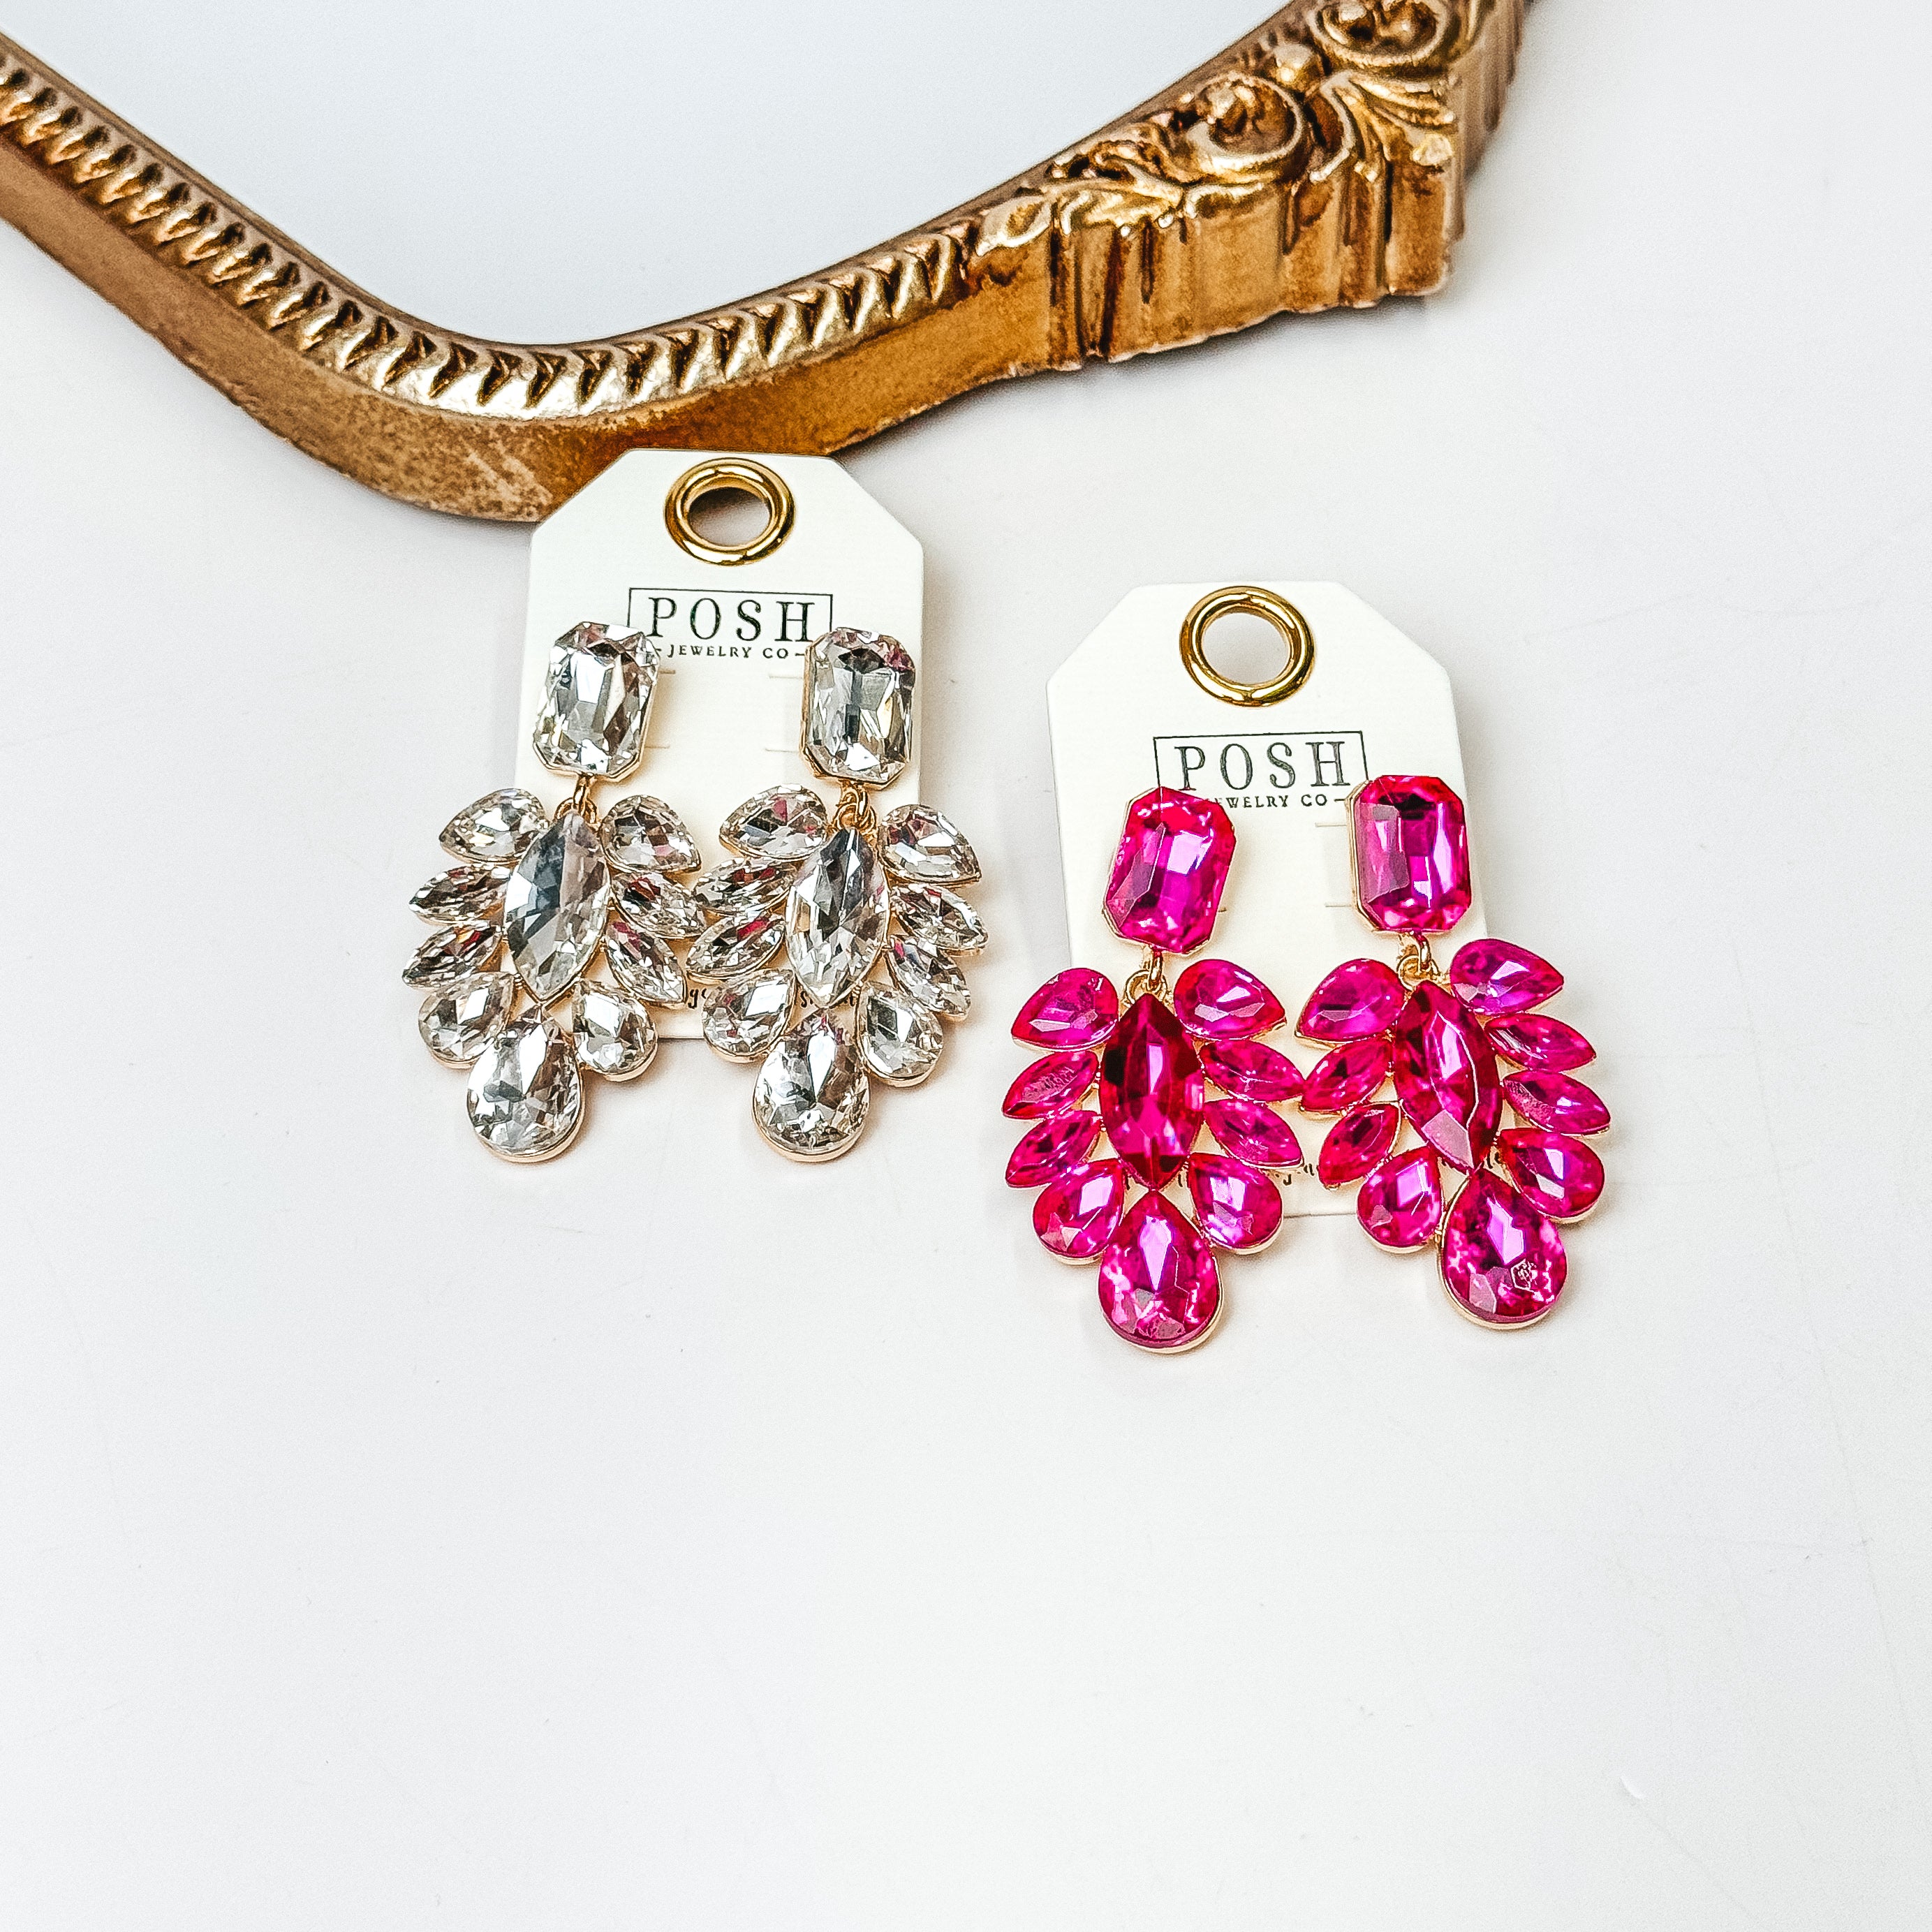 Pink Panache | Gold Tone Crystal Teardrop Statement Earrings in Fuchsia Pink - Giddy Up Glamour Boutique